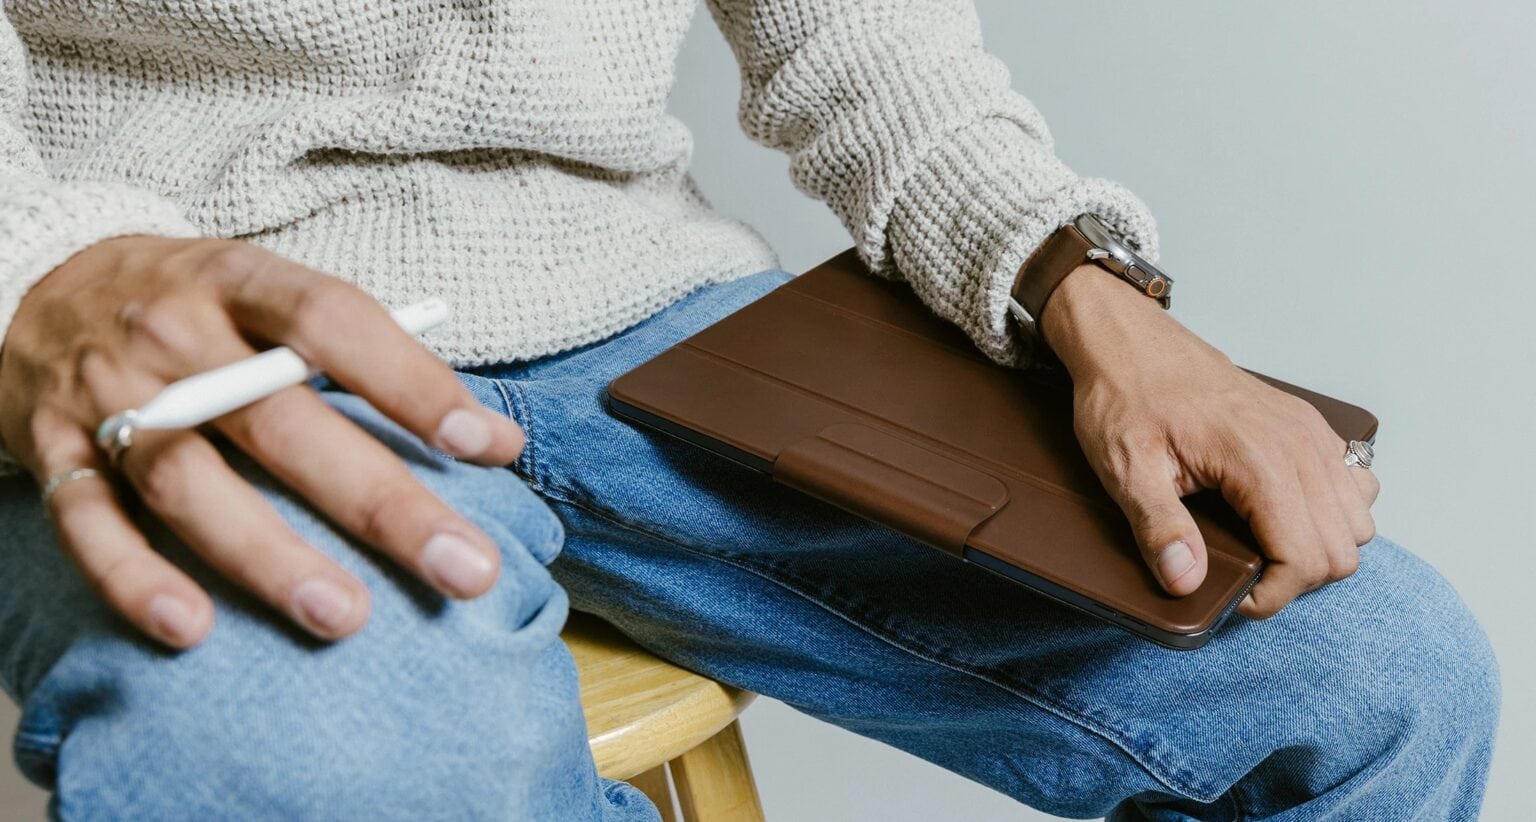 Not everyone's ready to give up their leather iPad case.